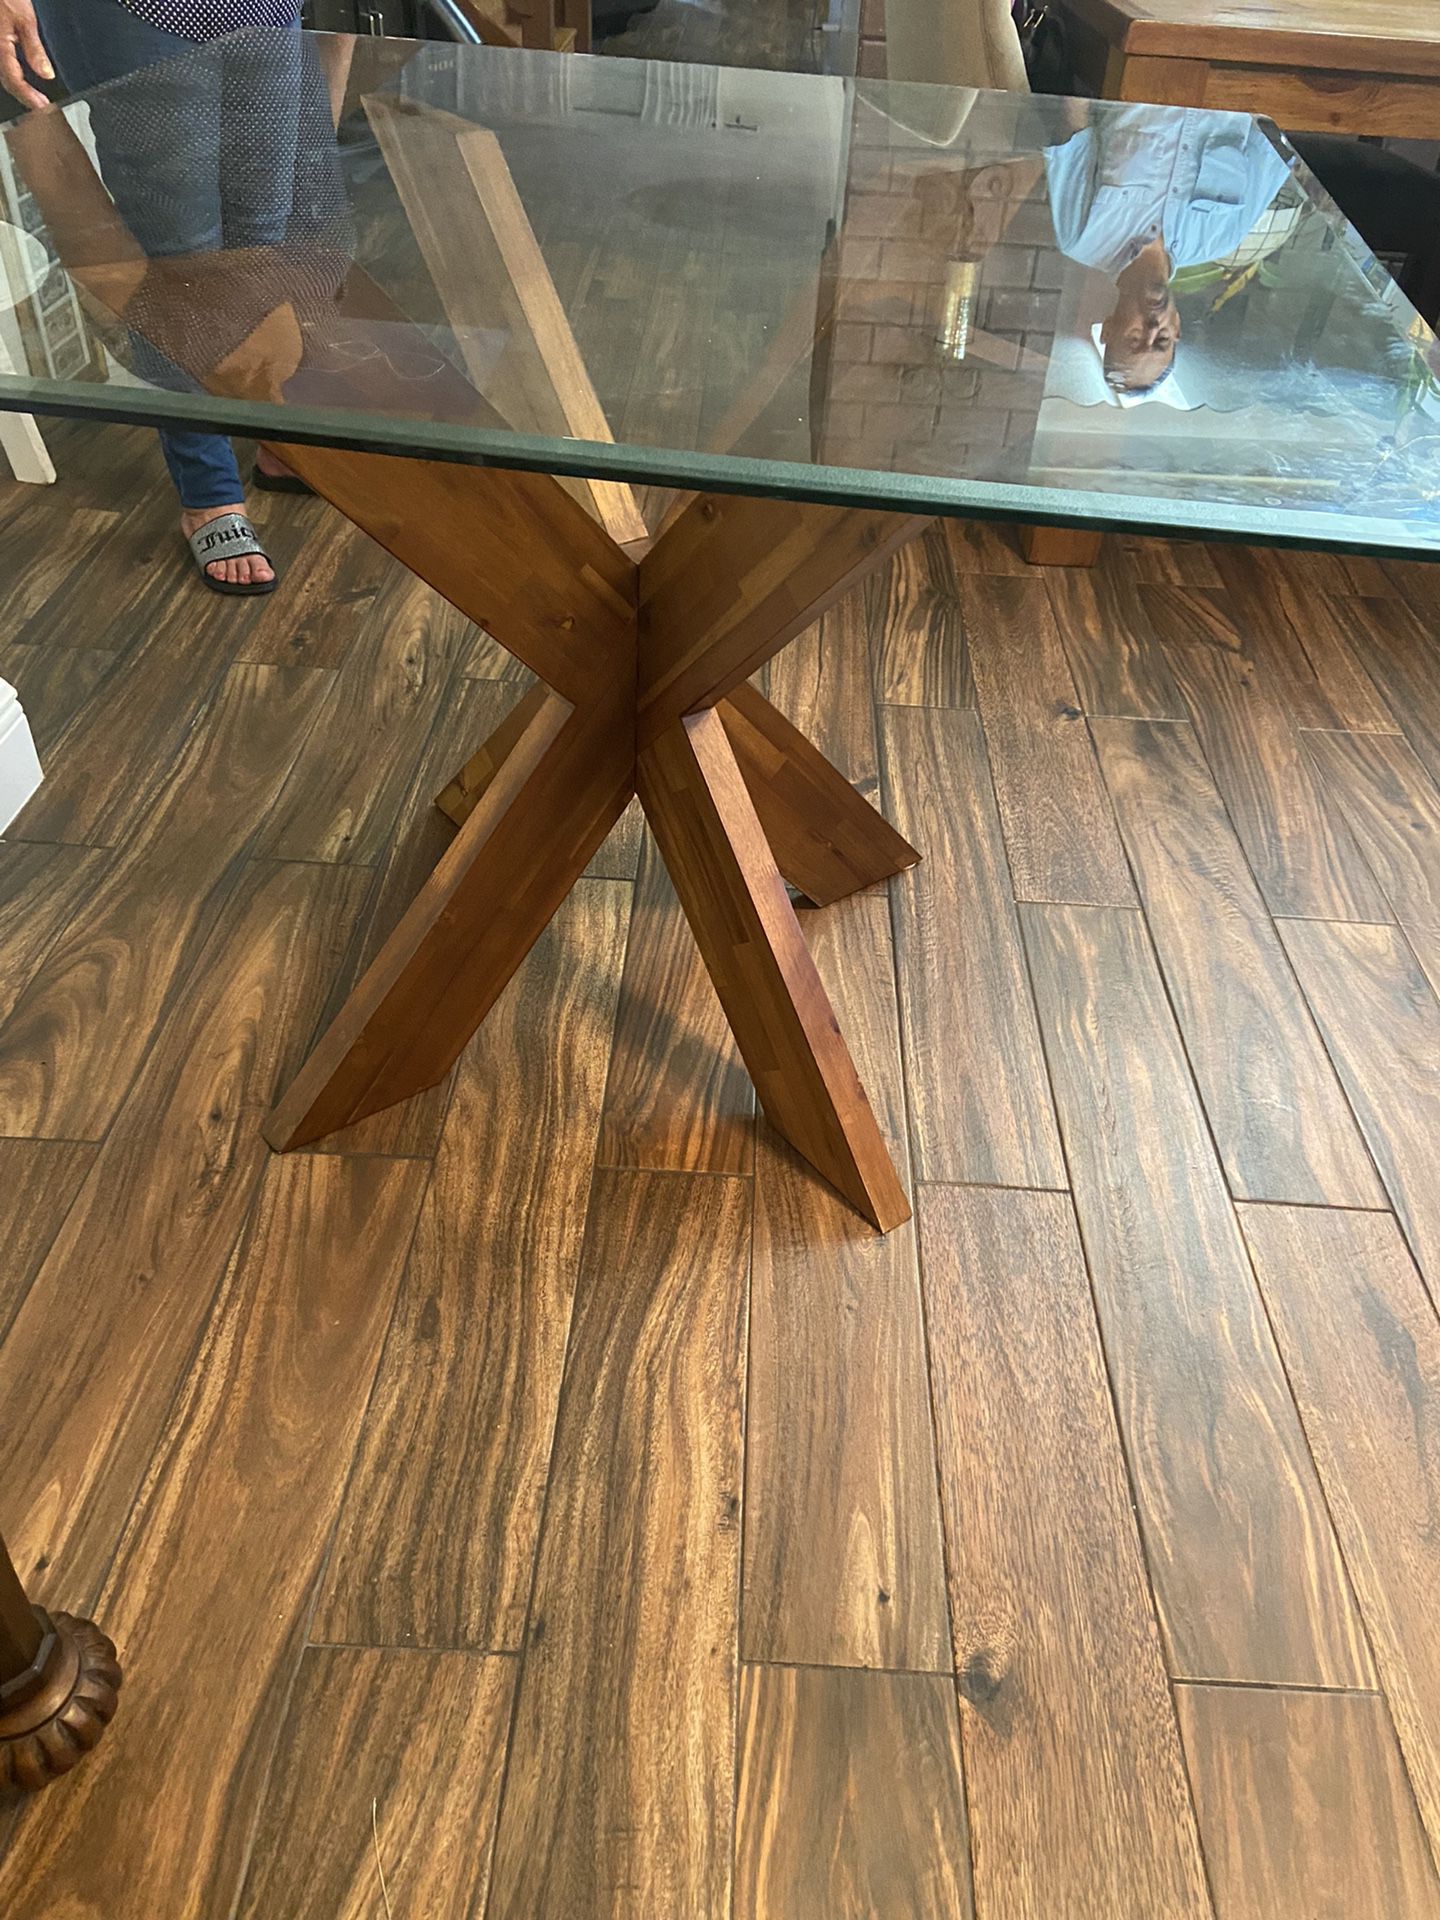 Dining Table With 4 Chairs- READ POST BEFORE RESPONDING